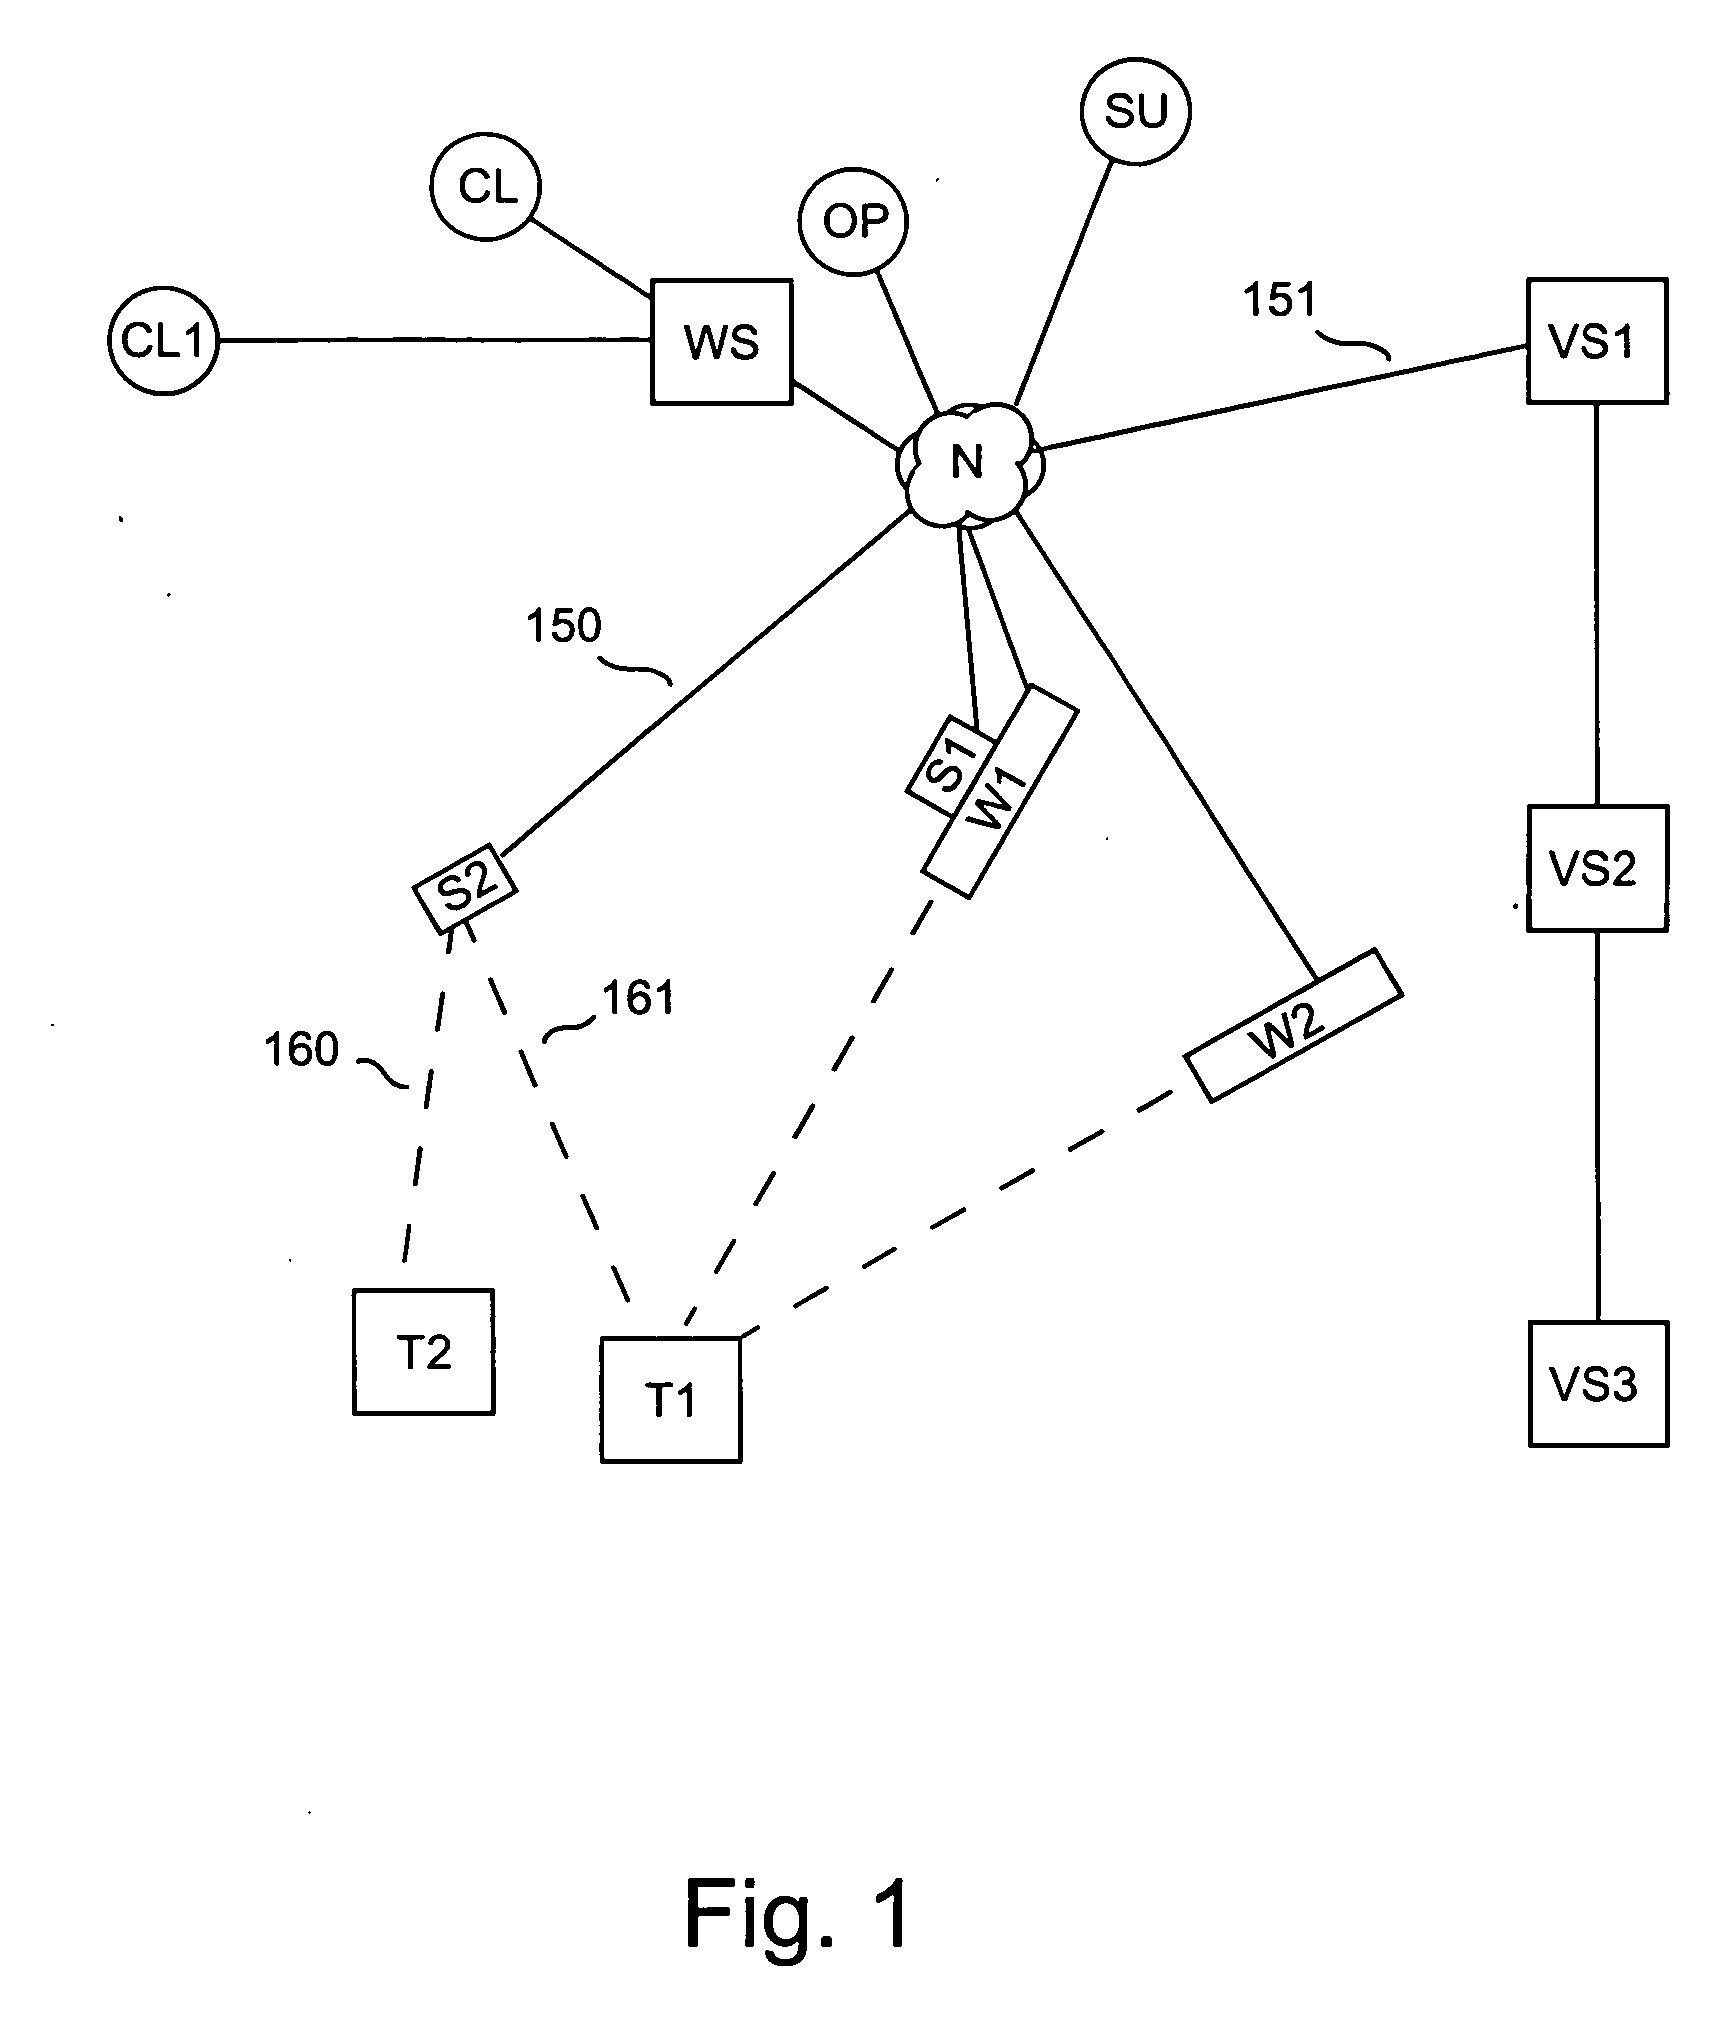 Public network weapon system and method